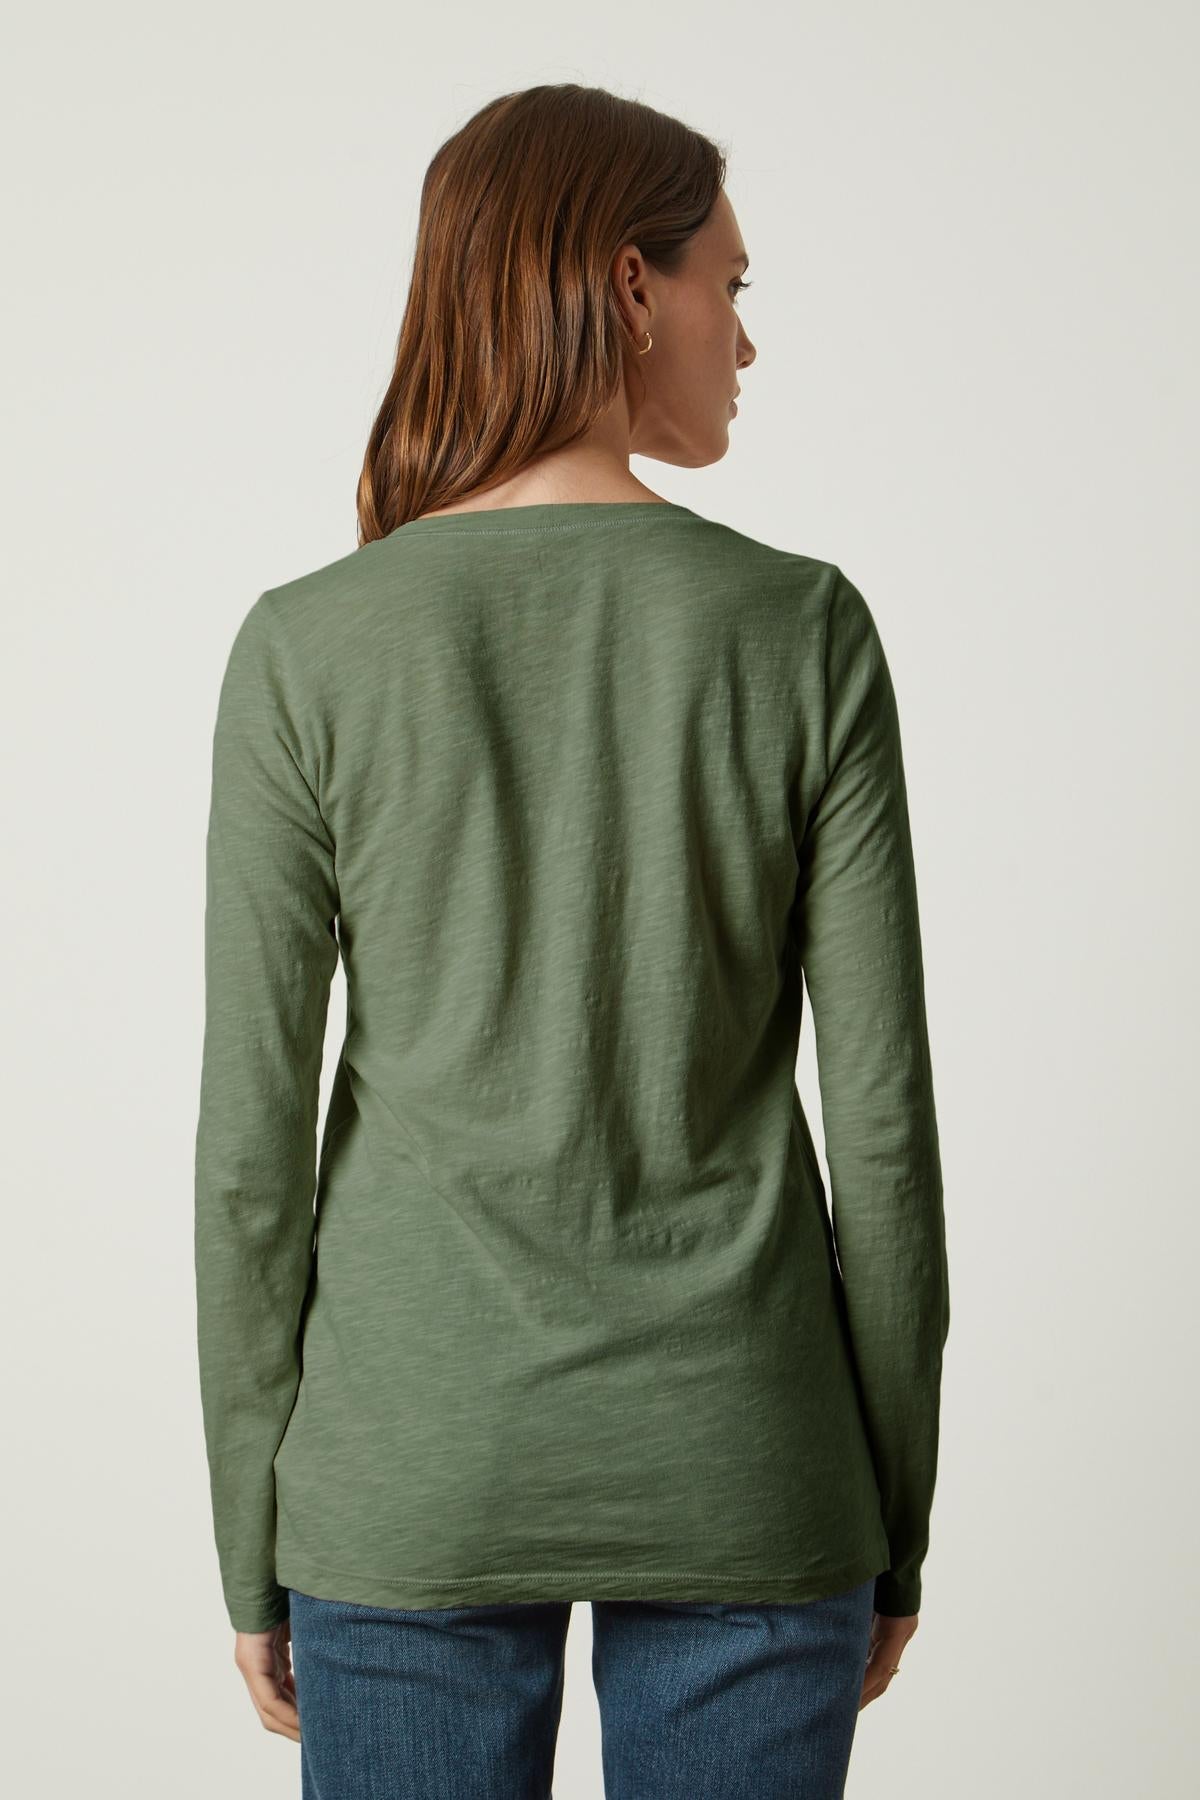 The back view of a person wearing jeans and a Velvet by Graham & Spencer BLAIRE ORIGINAL SLUB TEE.-35782759284929